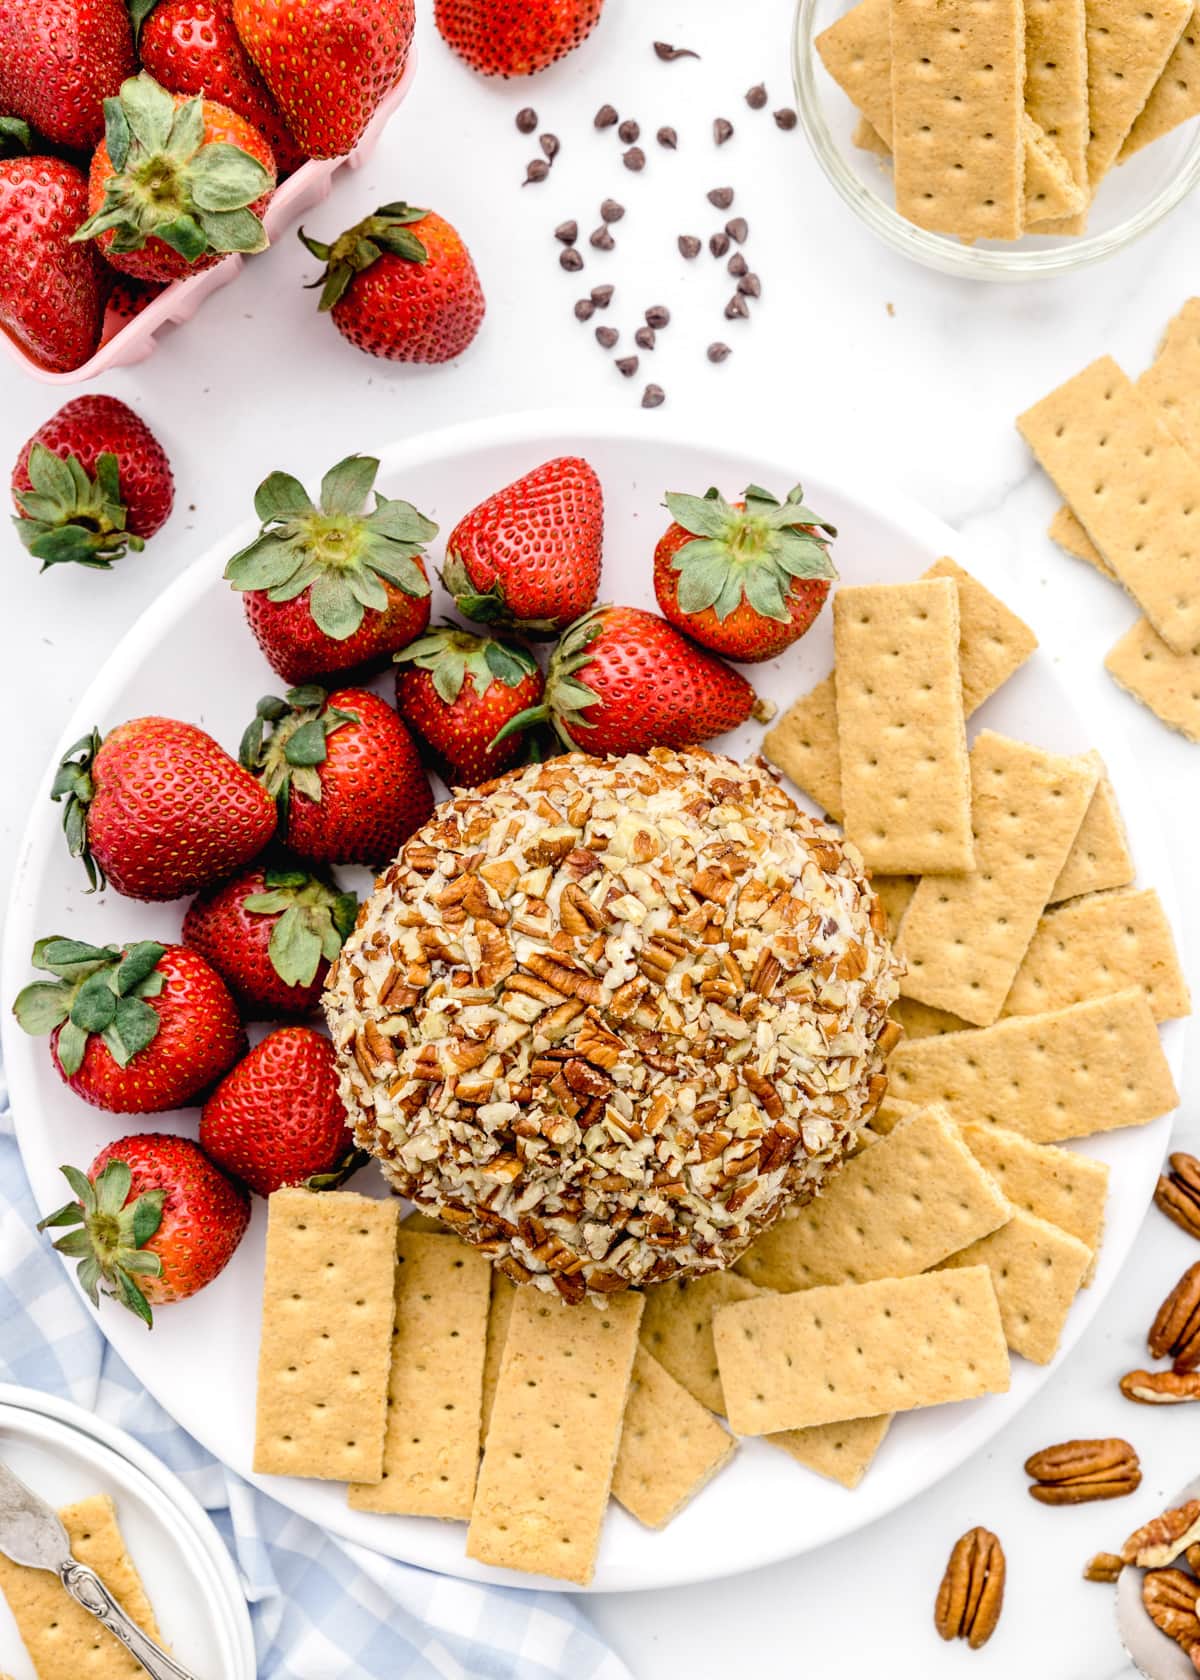 Plate of nut covered chocolate chip cheese ball served with strawberries and graham crackers.